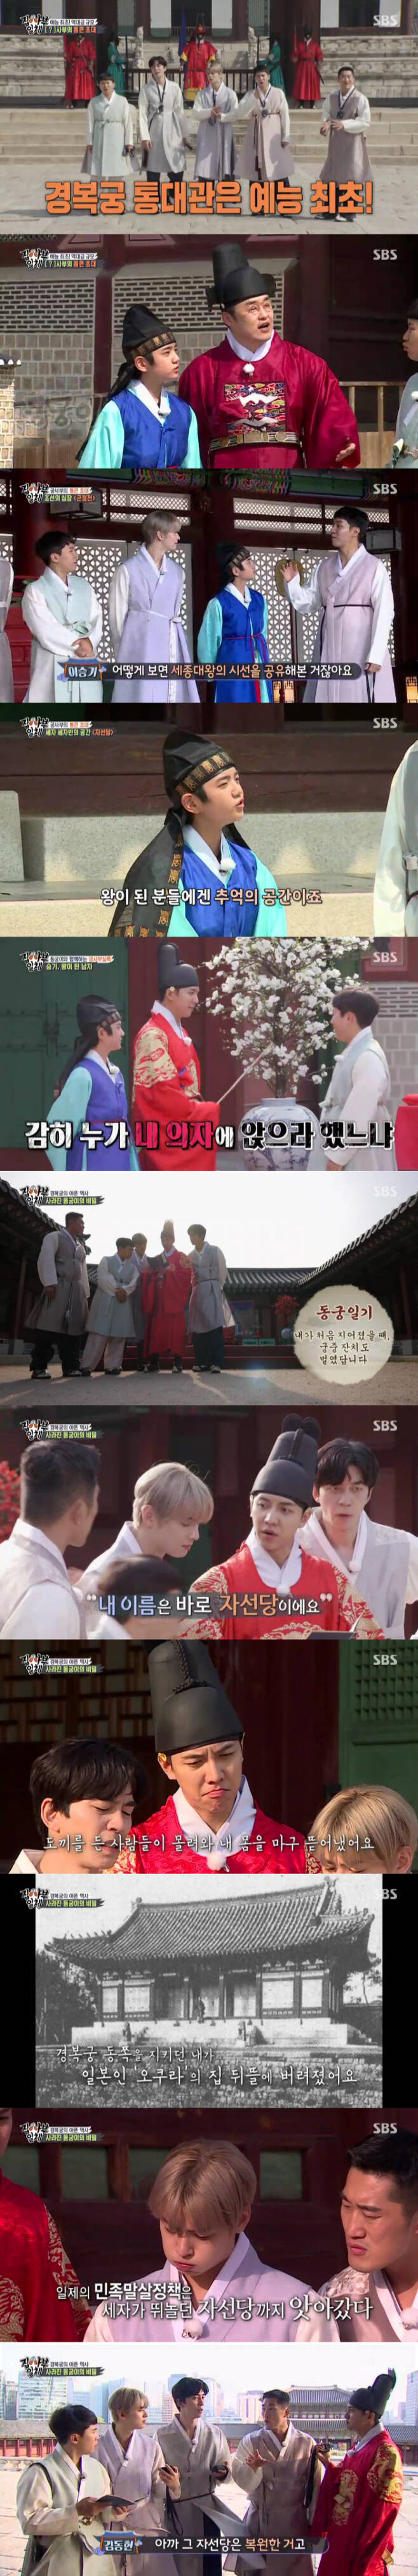 SBS All The Butlers gyeongbokgung appeared as a master and attracted attention, adding meaning to the heartbreaking history that was not well known.The Master was Gyeongbokgung on the day.In the appearance of the first non-personal master of All The Butlers, the members seemed to be excited that they were the first and best master.In addition, Choi Tae-seong, a Korean history star lecturer, was in charge of history on this day, and actor Kim Kang-hoon was with Goodbye My Princess.In particular, this film was the first to be awarded the Gyeongbokgung as a whole, and it was opened to the inside of the Geunjeongjeon and the gyeonghoeru second floor space that can not be easily entered.Members looked back at Gyeongbokgung following Choi Tae-seong and Goodbye My Princess.Choi Tae-seong said, If you look closely, there are many stories of people who lived here in the building.I think it would be the meaning of Gyeongbokgung Master to meet the story. Members looked inside the Geunjeongjeon and from gyeonghoeru to the Charity Party and the Guncheong Palace.Choi Tae-seong explained that the heartbreaking Empress Myeongseong incident was a space where the incident occurred, and the members said suddenly heartbreaks.Goodbye My Princess also said, I think it was too scary. I learned it in textbooks, but it is more terrible when I come.Lee Seung-gi said, I thought it was a splendid place with a king, but it was like a place where people live.While continuing to spend time at Gyeongbokgung, Goodbye My Princess, who was with the members, suddenly disappeared and embarrassed everyone.At this time, an unrelated person appears with a diary of Goodbye My Princess, Please find Goodbye My Princess with these clues.Goodbye My Princess must be in Gyongbokgung. The diary read, I am called Goodbye My Princess, which is the palace built in 1427 and the palace in the east.So the members found that Goodbye My Princess was not a person but a charity party.Members followed the diarys clues to the Charity Party, where a second diary was placed in front of the Charity Party.The diary had a shocking past that the Japanese government auctioned Gyeongbokgung.Members said, It was about 100 years ago, and did not easily say, I did not know that Gyeongbokgung was auctioned and torn it to Japan.Since then, the members have gone to the backyard of the Guncheong Palace in search of the original charity, but there was only a place left.Choi Tae-seong told the heartbreaking story of the philanthropy being reduced to a Japanese private art gallery as the gyeongbokgung pavilions were auctioned off.In 1923, the Kanto earthquake caused the charity to eventually disappear into a fire.After that, Professor Kim Jung-dong, who tried to rebuild his bitter history without forgetting, told the back story that he was able to return the neglected stone to Gyongbokgung.In addition, Choi Tae-seong told everyone that the backyard of the Guncheong Palace, which moved the charitable hall, was a place where Empress Myeongseong was buried and burned.Shin Sung-rok said, If we did not know this, we would just see it even if we came to Gyongbokgung.Choi Tae-seong said, Before the stonework of the Charity Party came back, the history of the Charity Party was erased.It was a restoration of the Charity Partys story by taking it back and putting it back.He said, It is our duty to restore the lost history by finding one by one, reclaiming the lost story, and to pass on to the future.This is the teaching of the Gyeongbokgung Master. Following the heartbreaking history hidden on this day, the scene of the Gyeongbokgung Masters teachings reminded me of the meaning and took the best one minute with a 5.5% audience rating per minute.